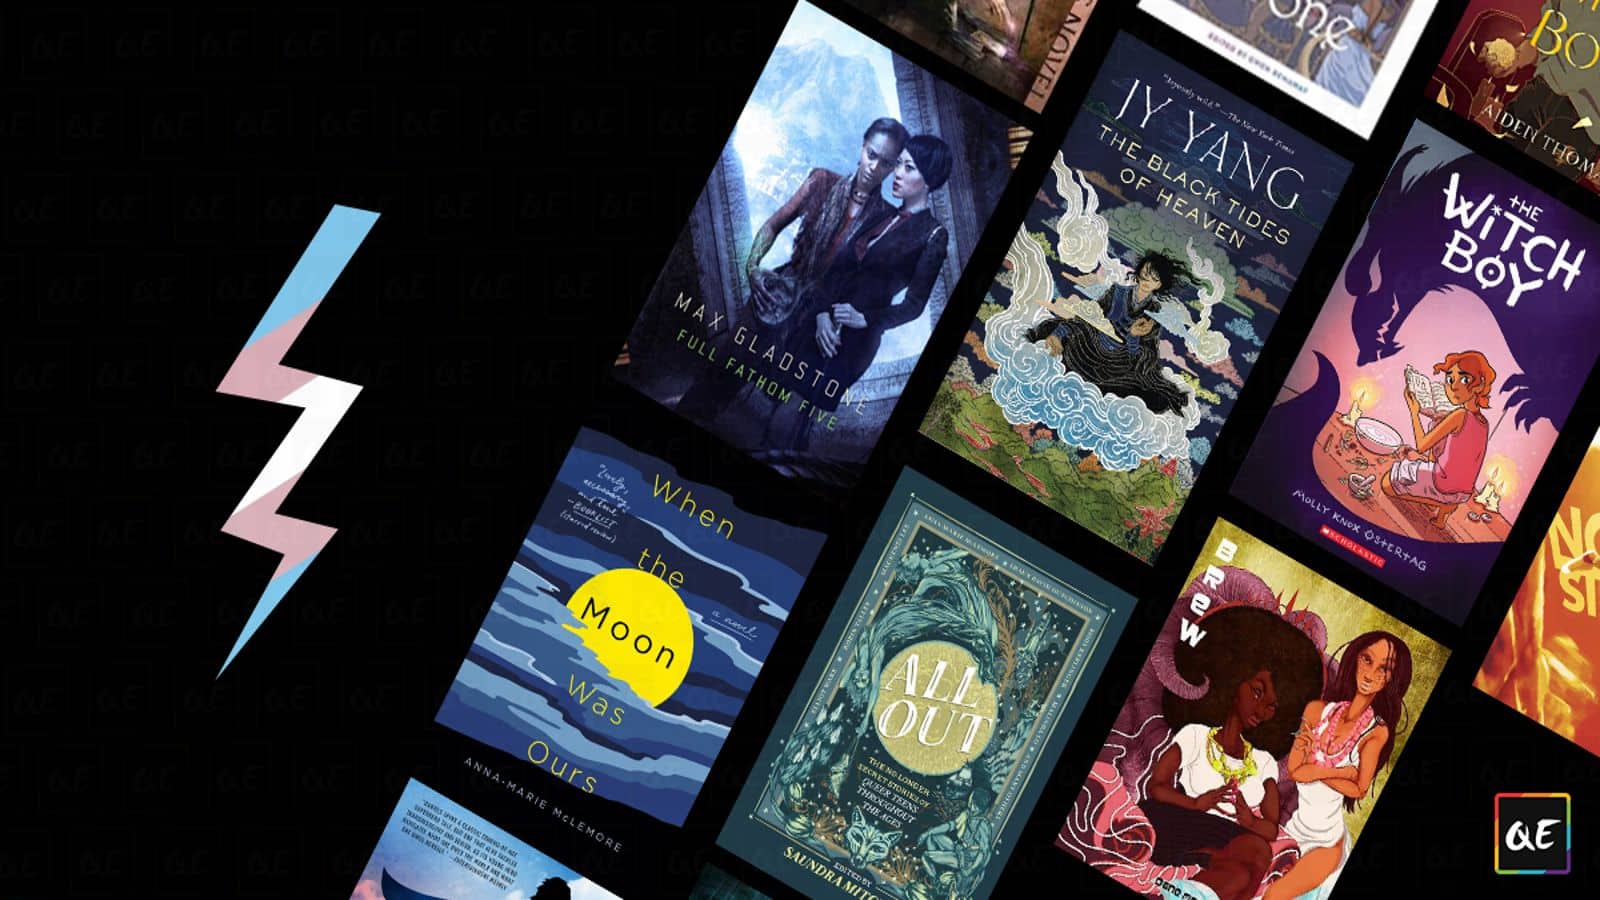 These books are 'Harry Potter' alternatives